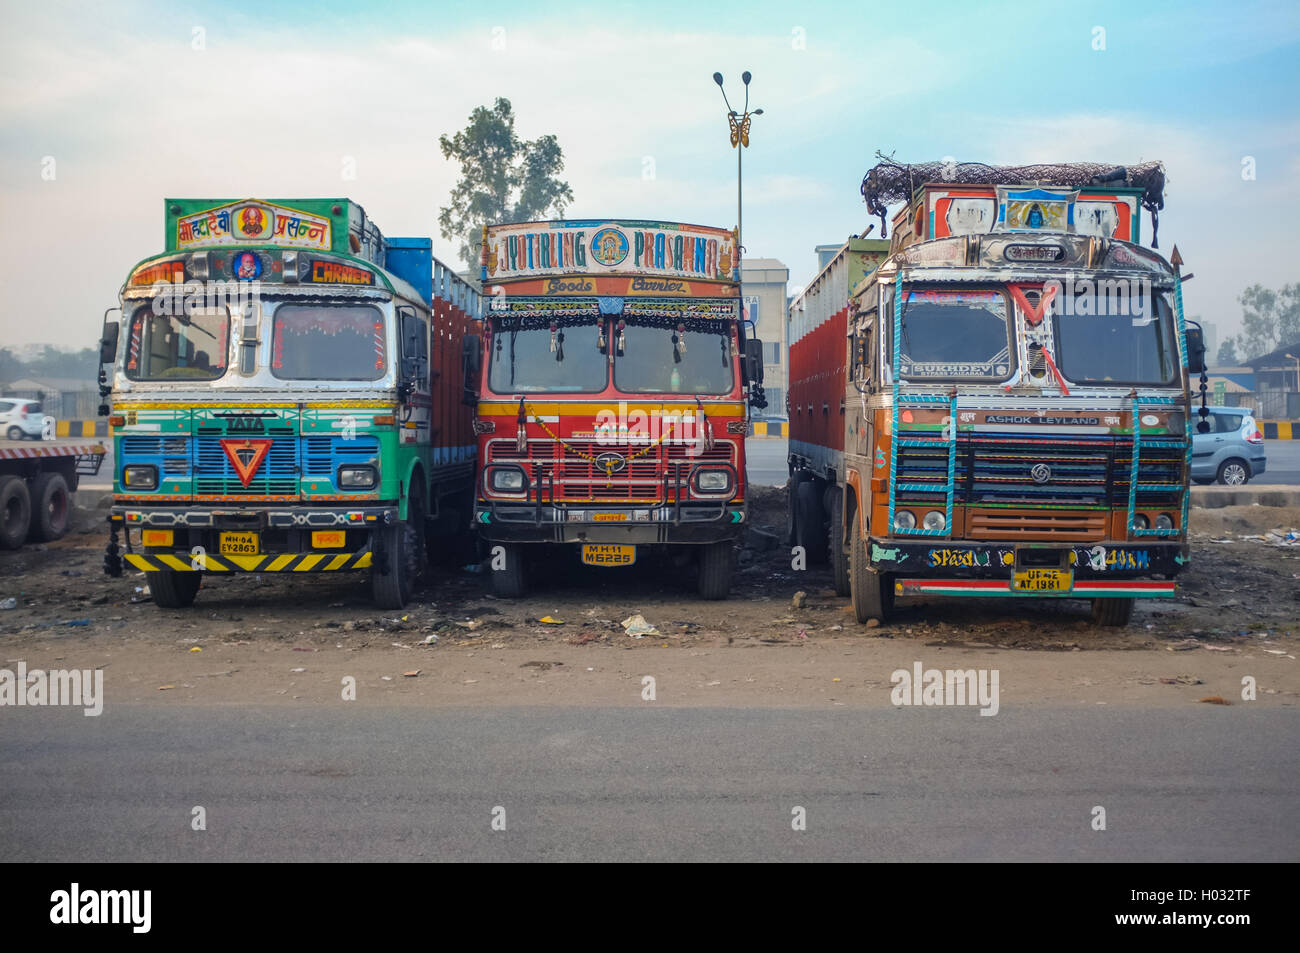 MUMBAI, INDIA - 05 FEBRUARY 2015: Parked trucks on highway rest area decorated in traditional Indian style. Stock Photo